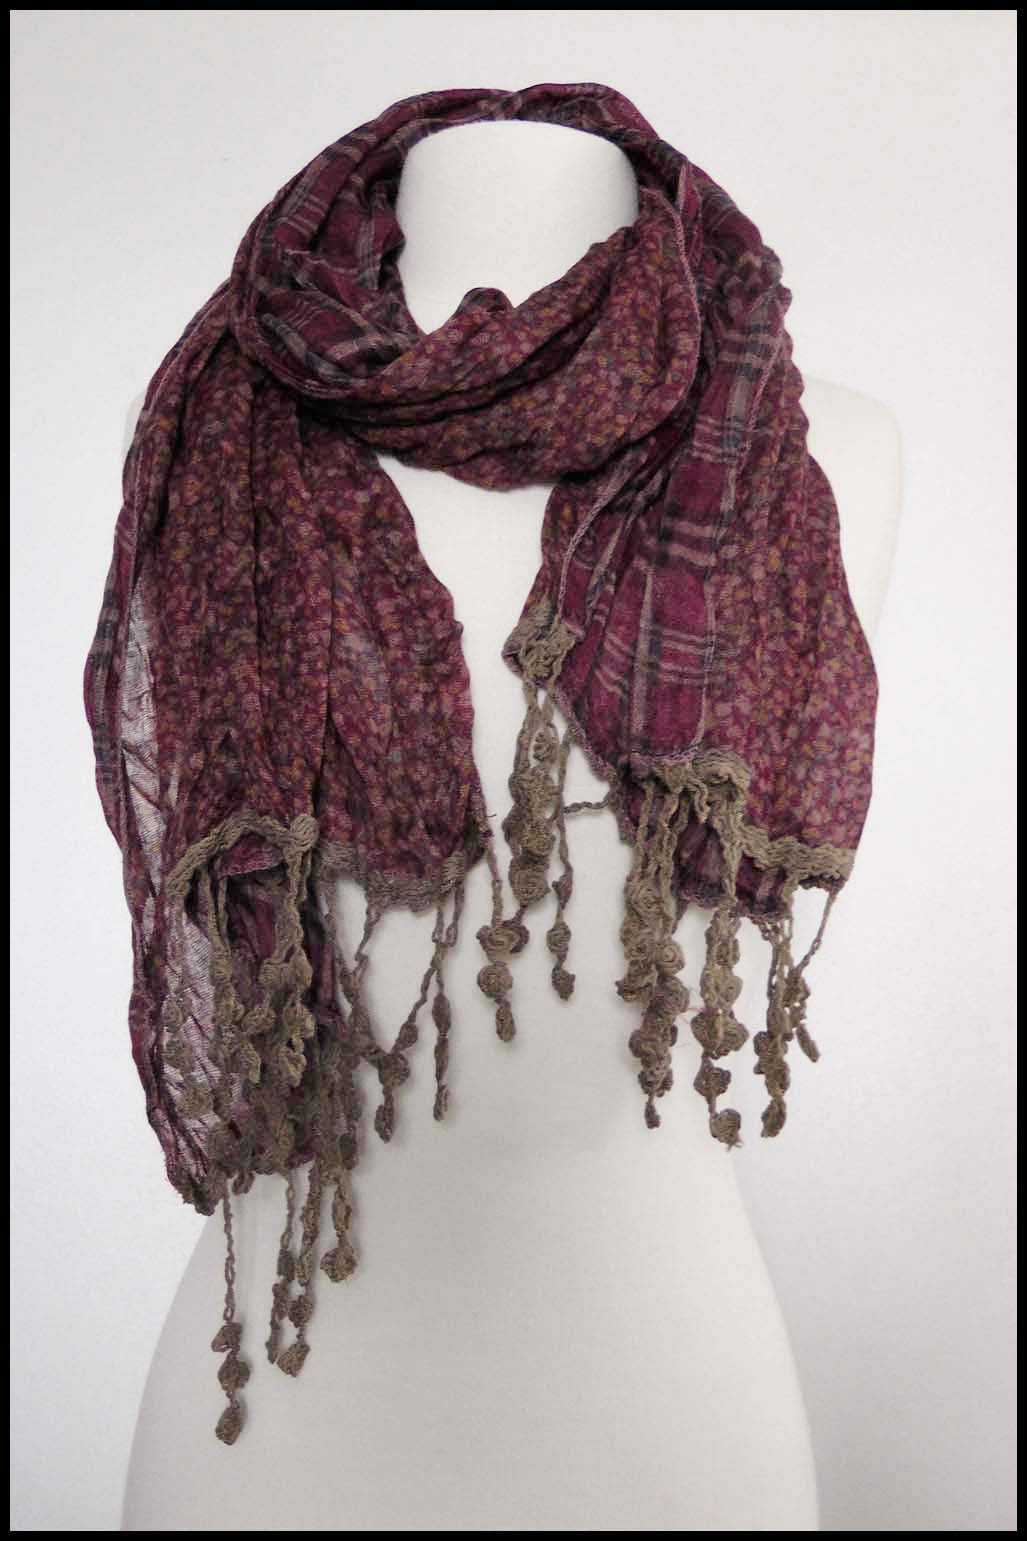 Lightweight Reversible Scarf with Floral, Paisley and Polka Dot Patterns